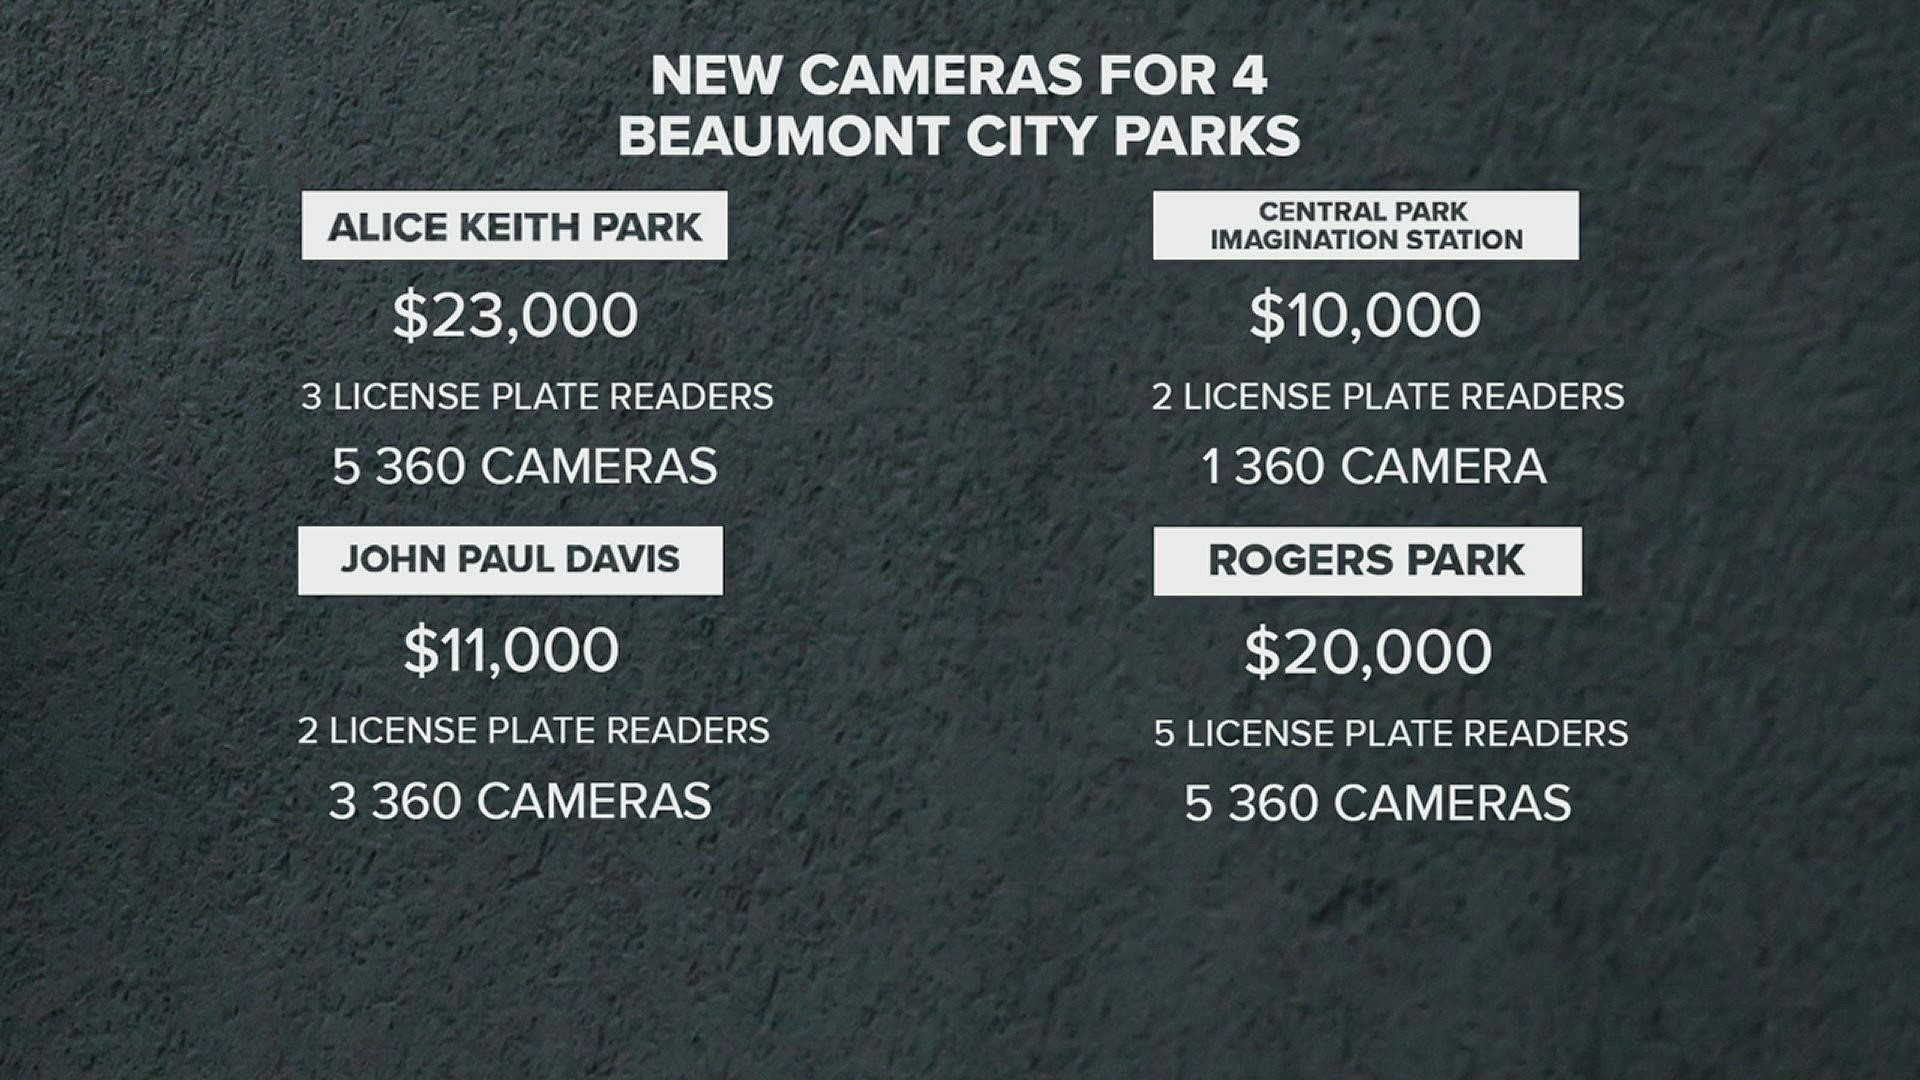 City leaders did not stop at the cameras. They now have $1.4 million budgeted for park improvement city-wide.